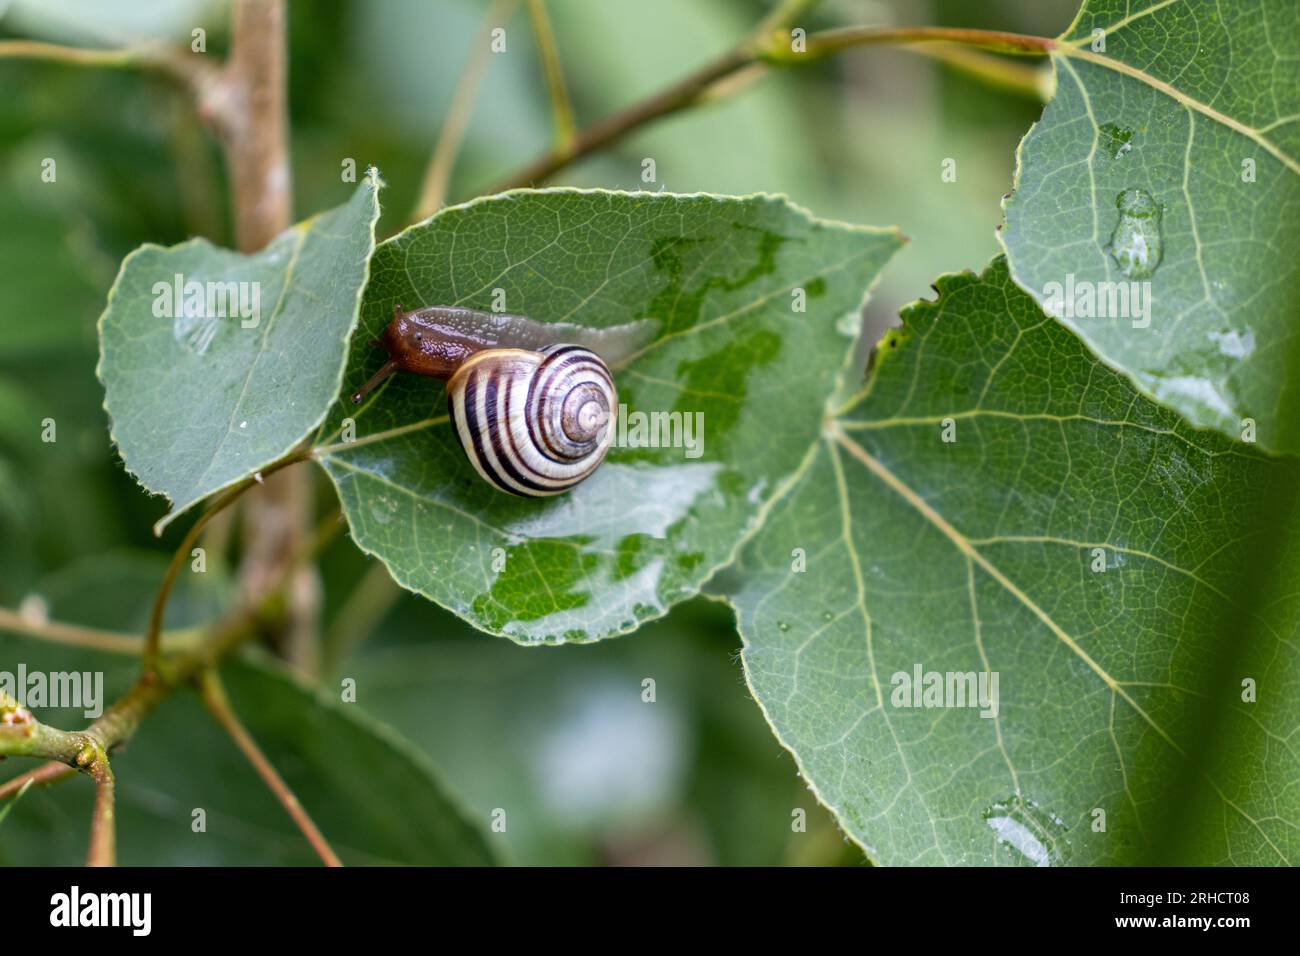 Snail on green leaf - close up shot of brown and white striped shell - jagged leaf edges - blurred green background Stock Photo